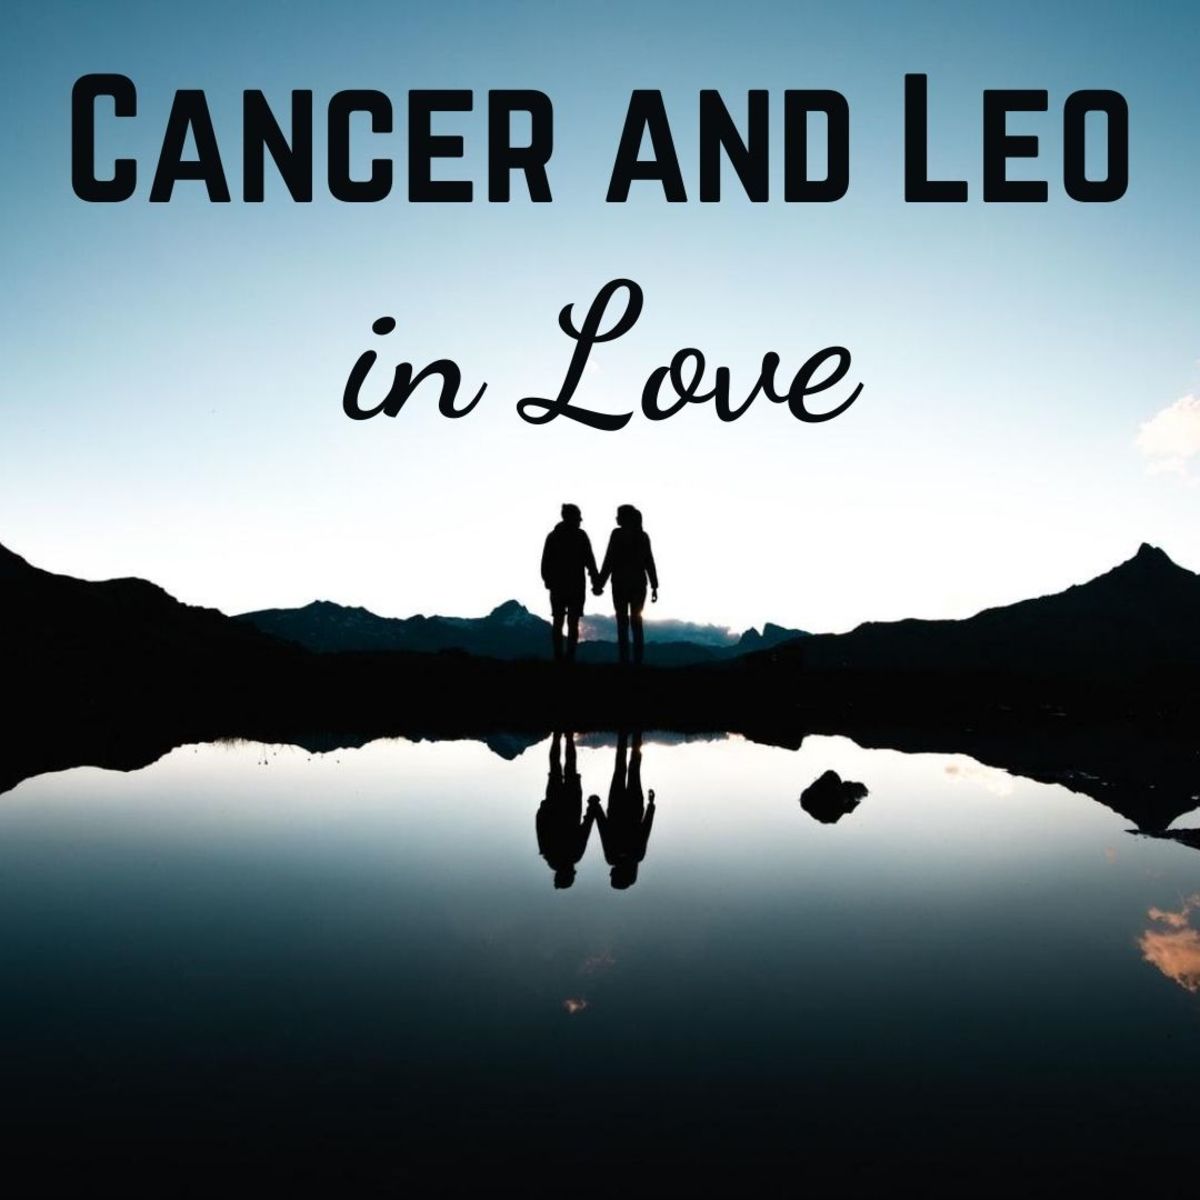 Differences Between Cancer And Leo